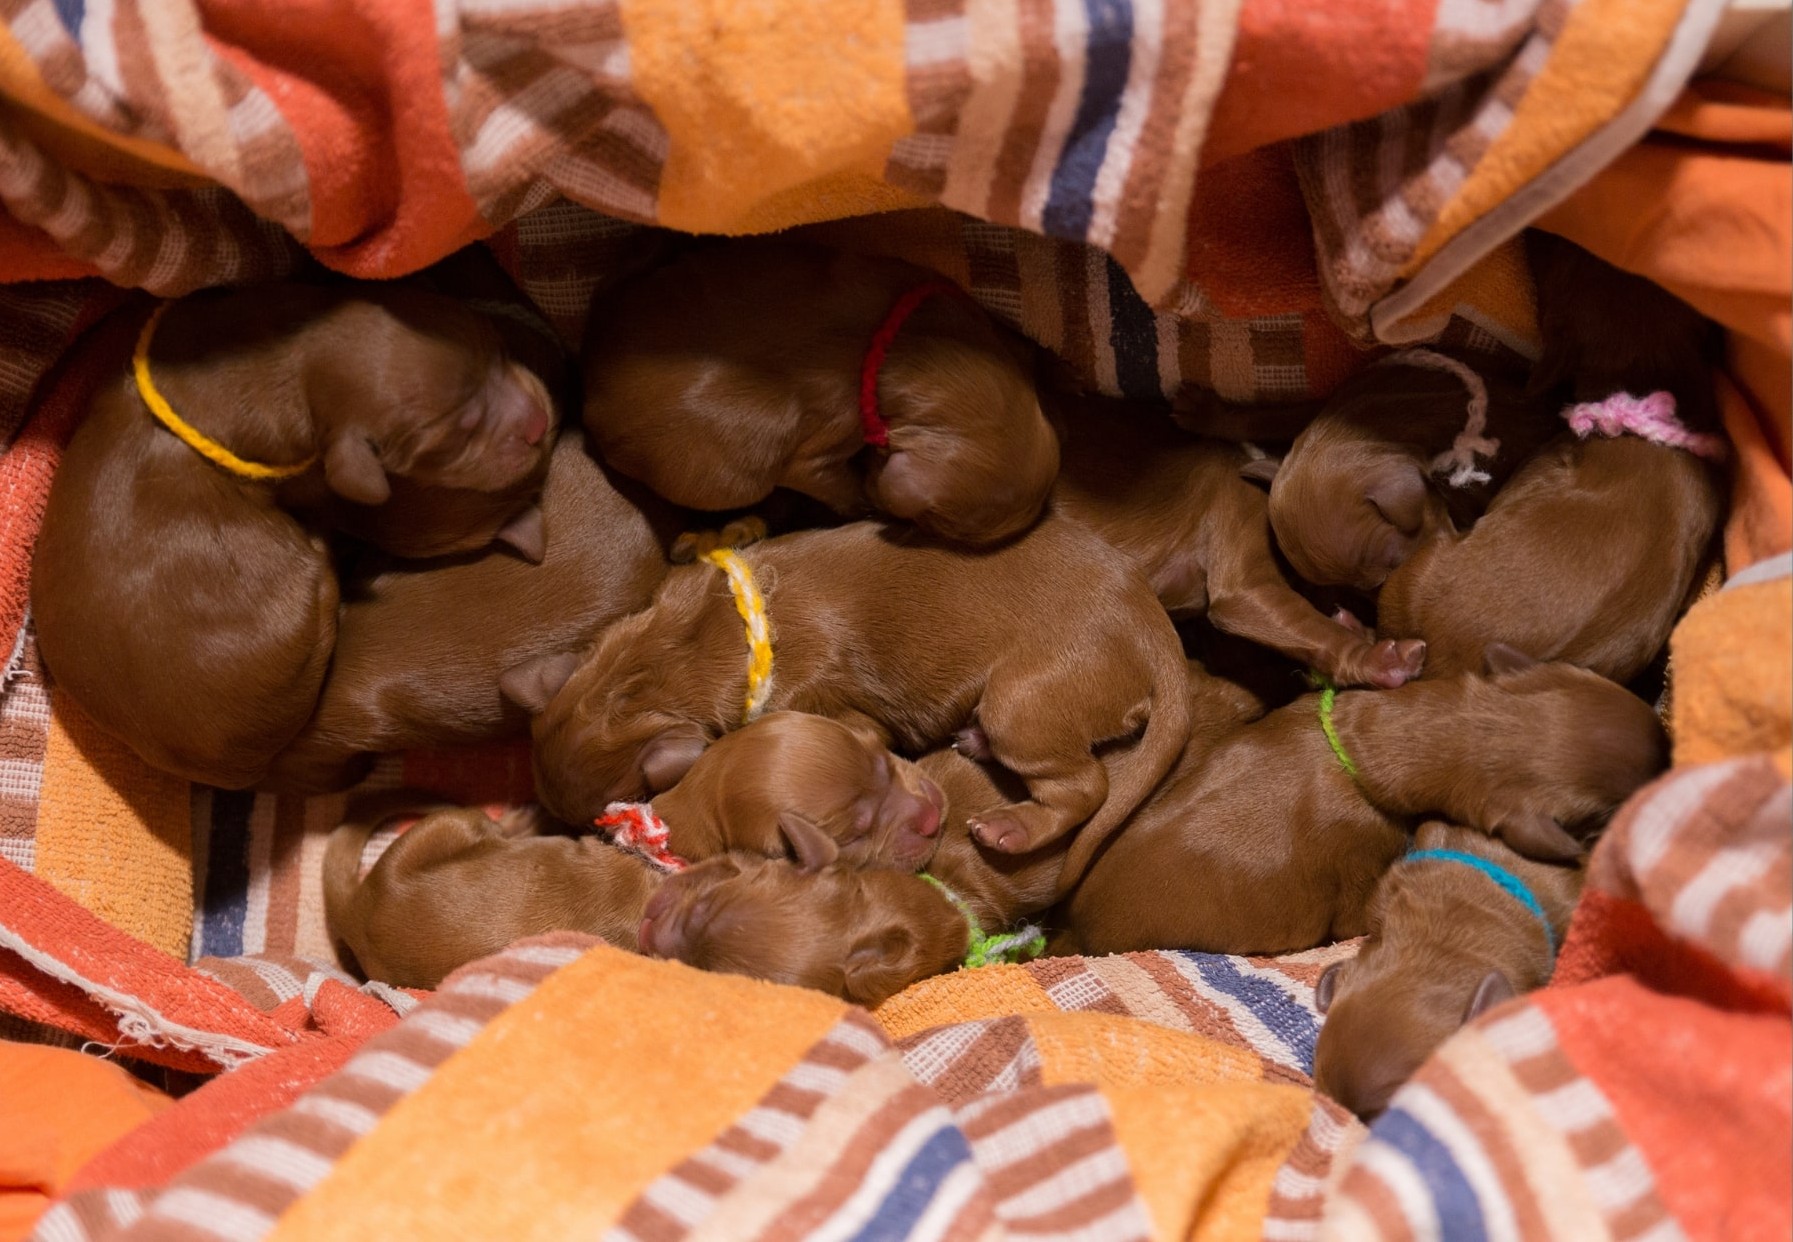 How to Care For Newborn Puppies and Their Mother